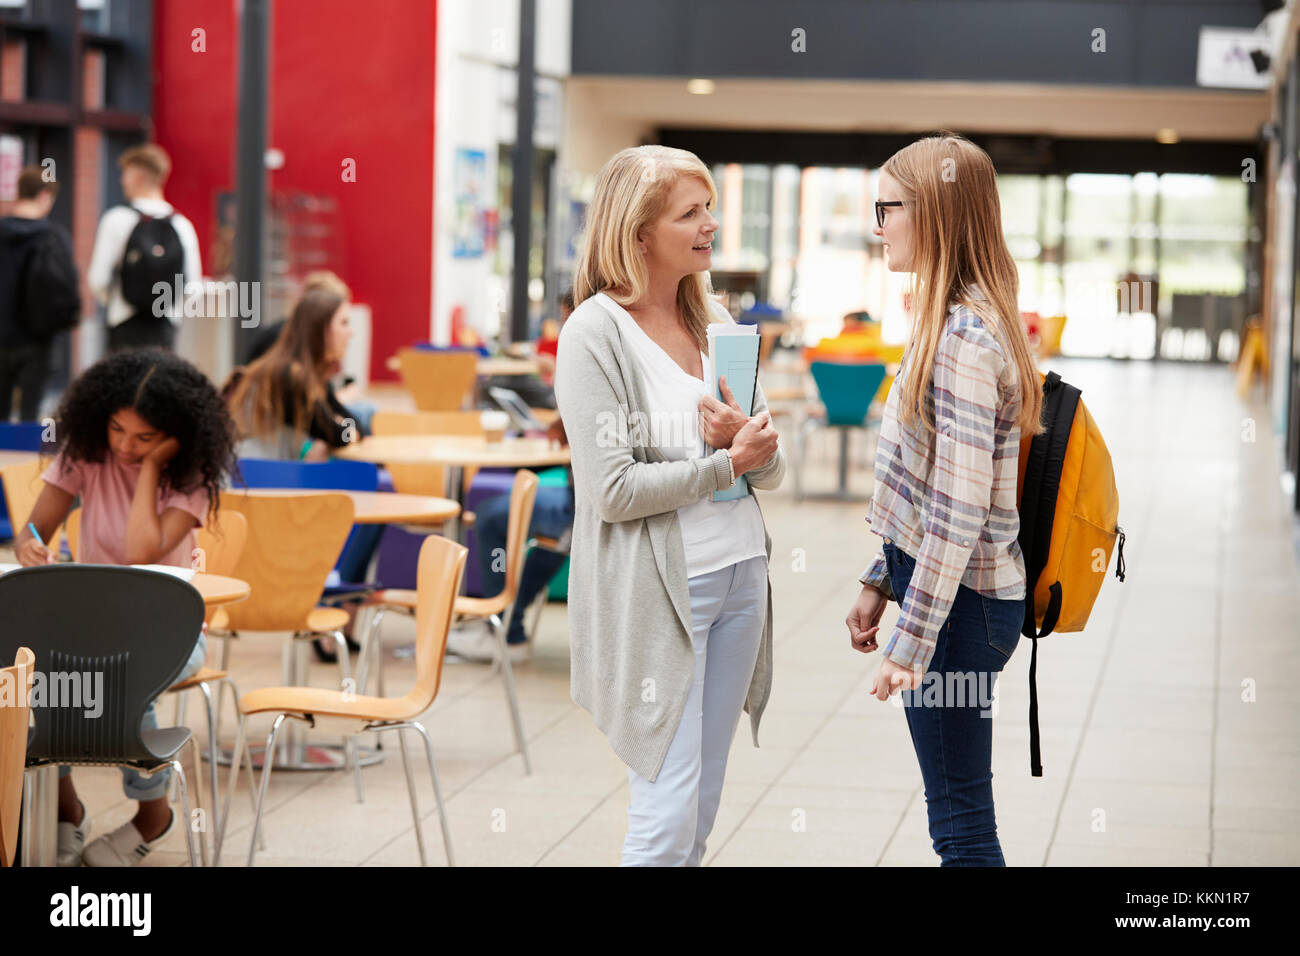 Teacher Talks To Student In Communal Area Of College Campus Stock Photo